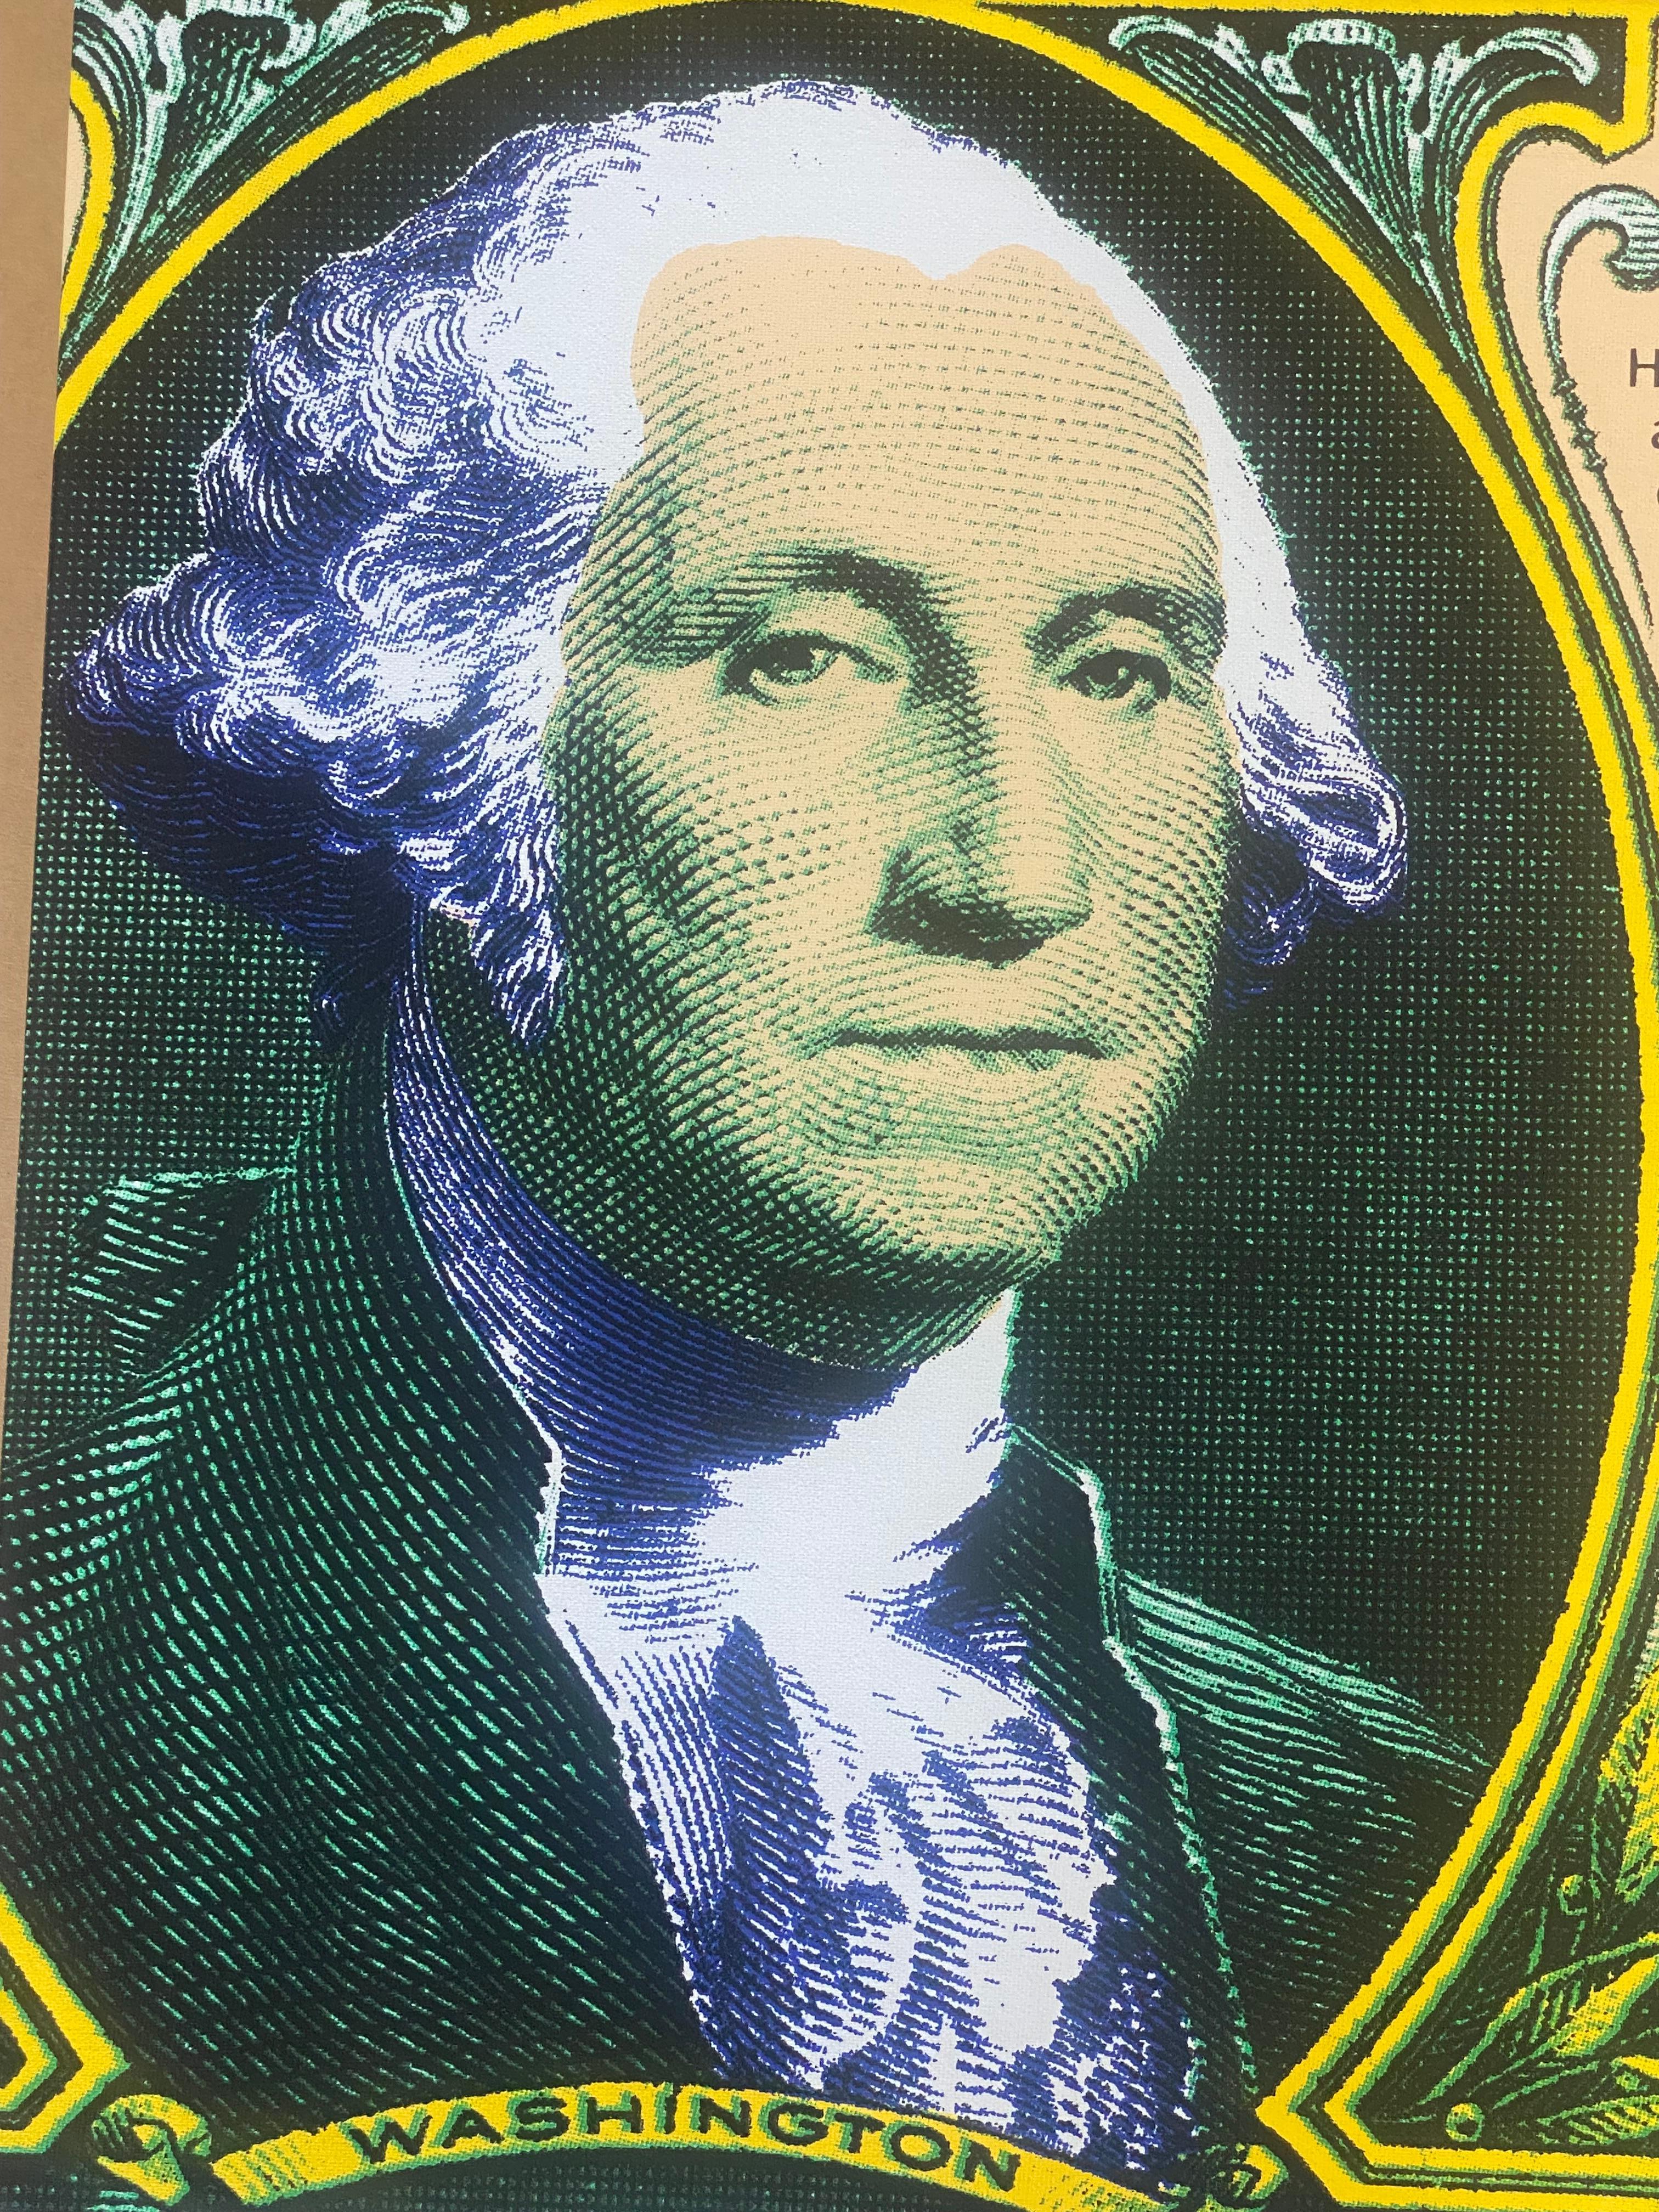 George Washington: Father of Our Nation - Print by Steve Kaufman